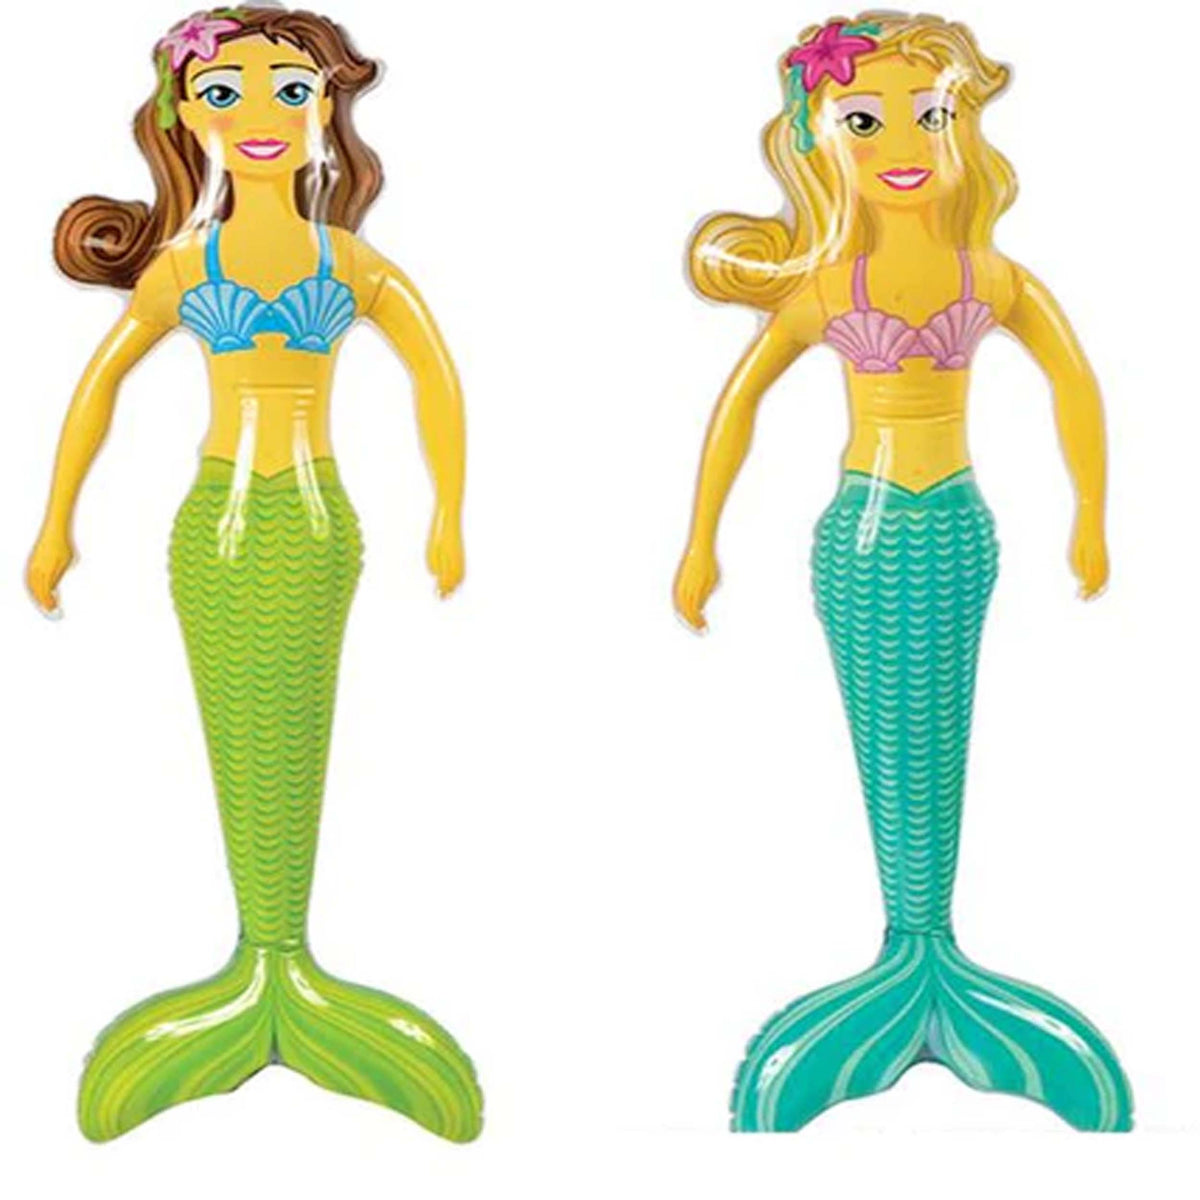 Mermaid 36-Inch Inflatable Toy in Bulk - Assorted